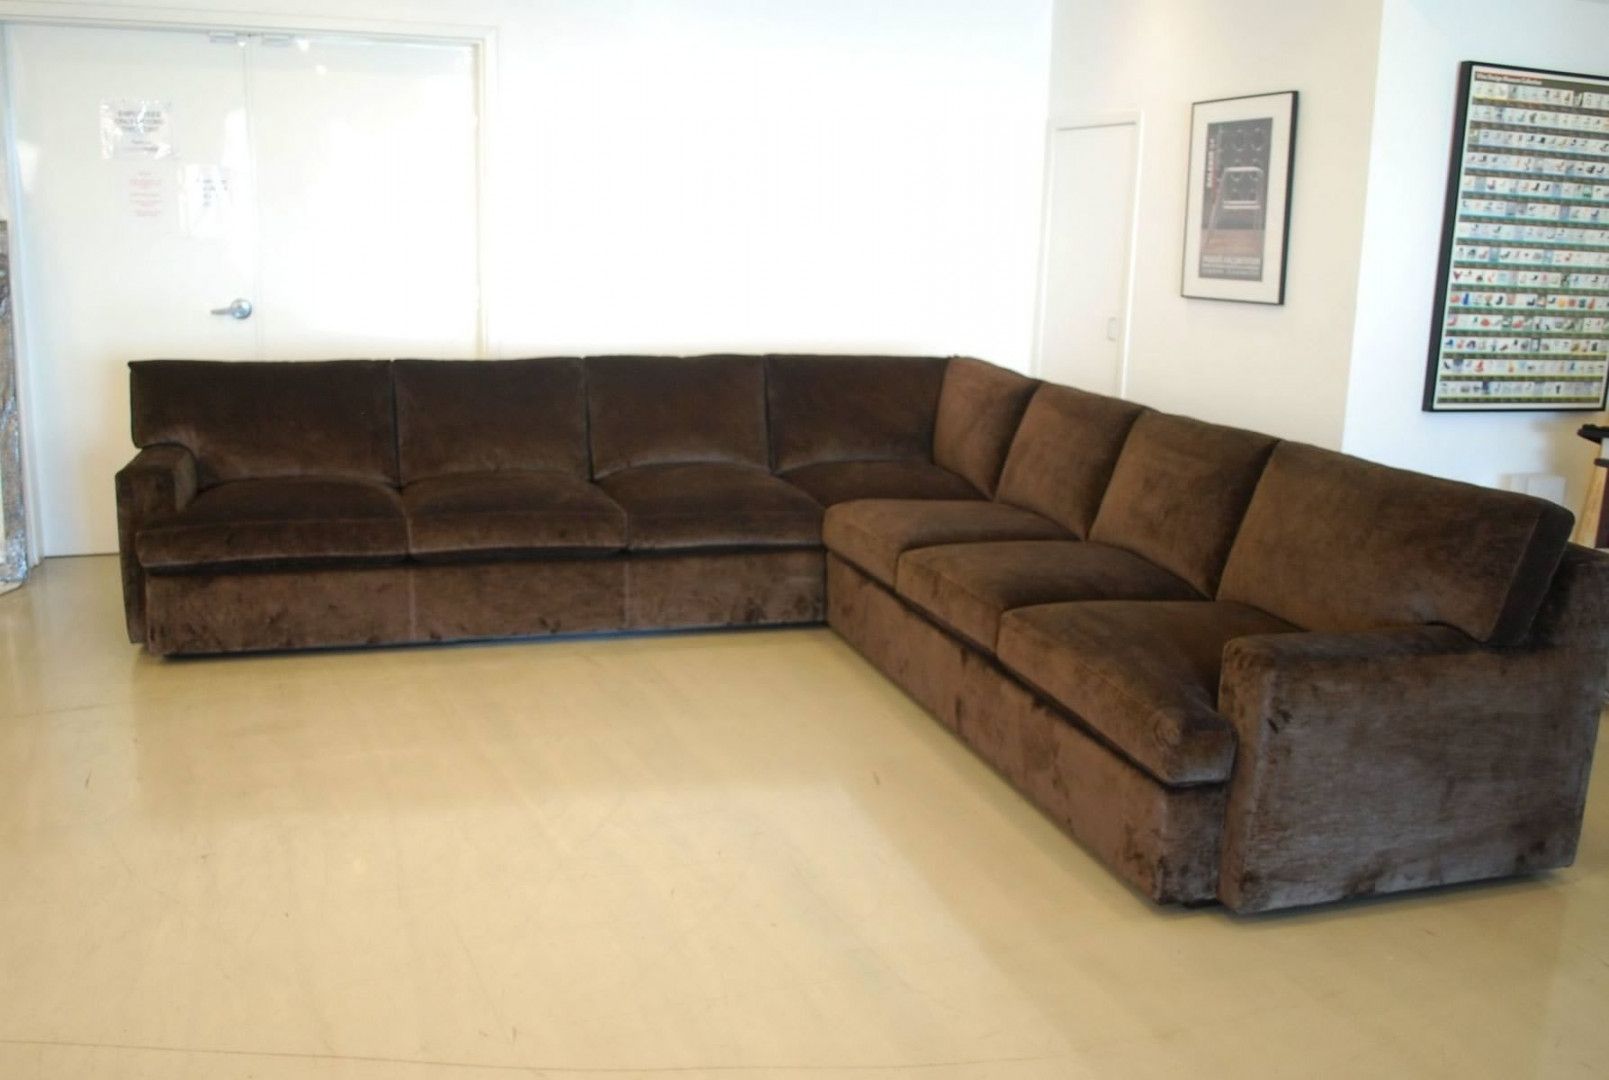 Sectional Sofa Design: Custom Sectional Sofas Recliners Small | Home Throughout Customizable Sectional Sofas (View 8 of 15)